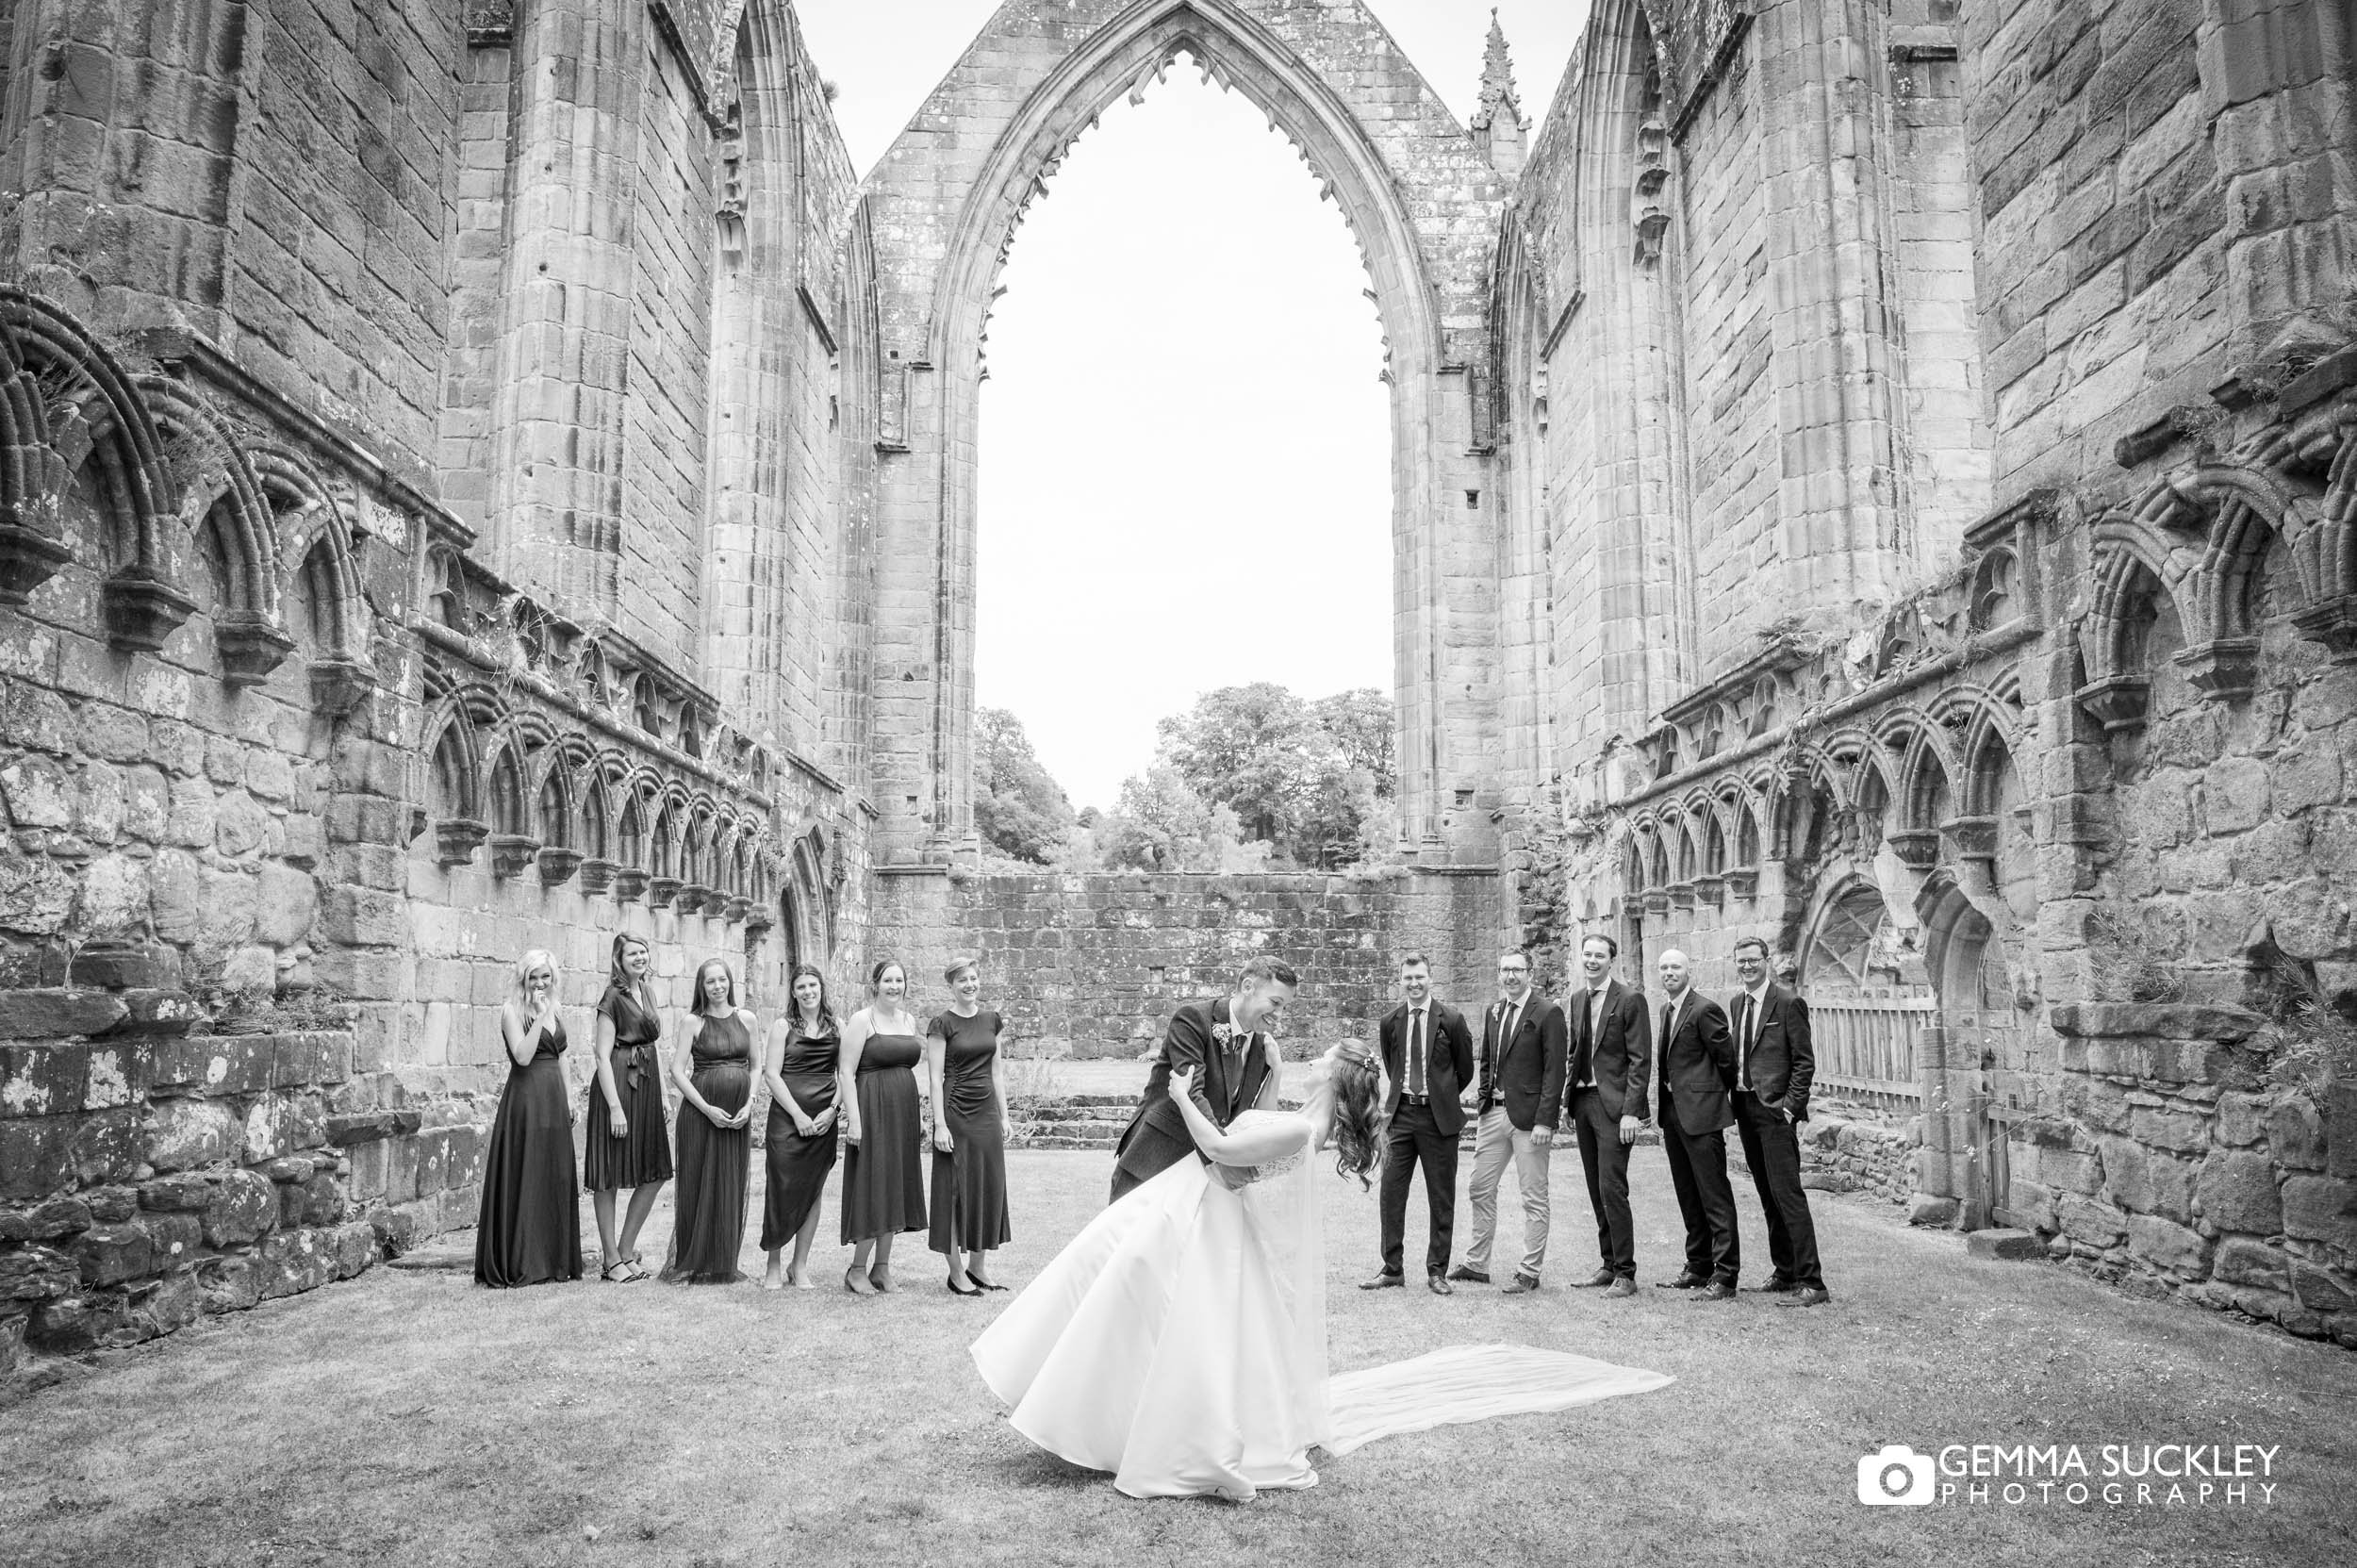 the groom dipping this bride over at bolton abbey priory ruins